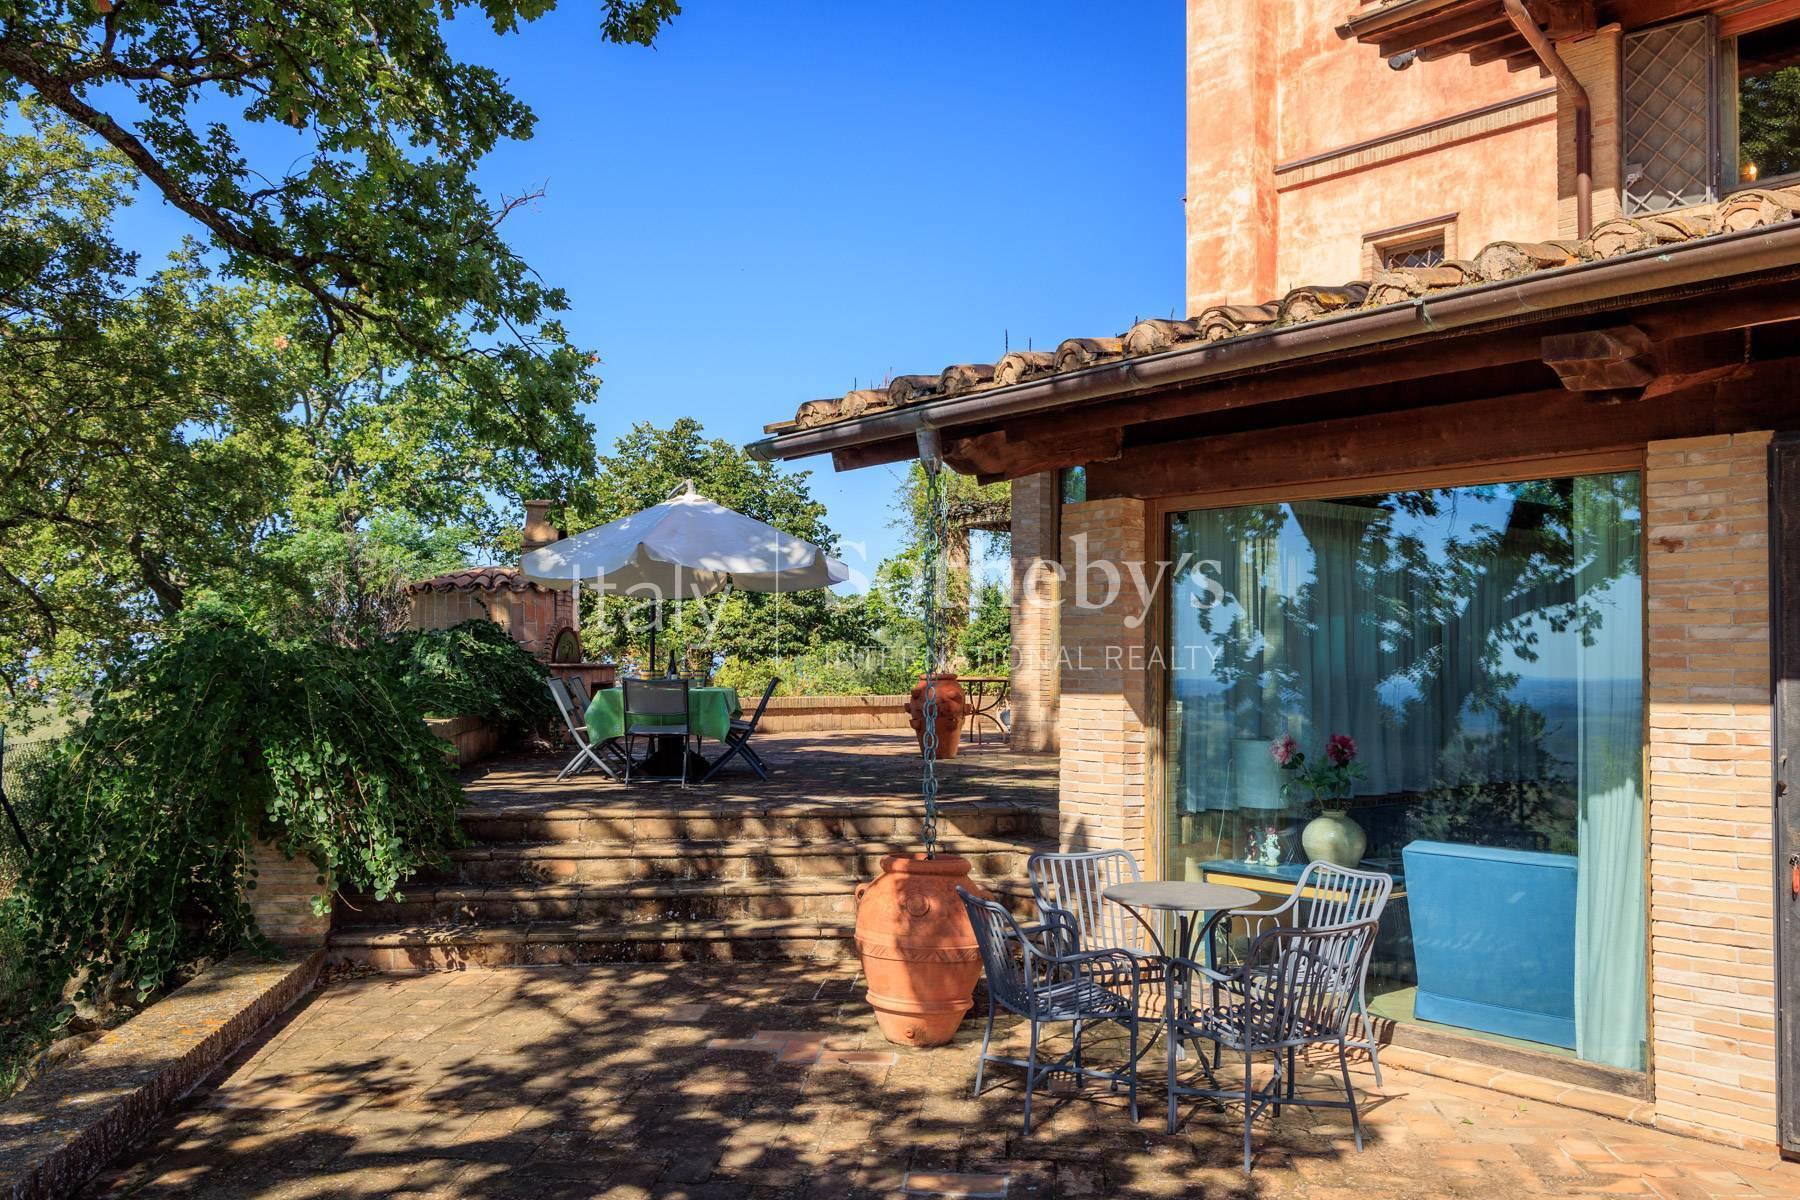 Villa with view and pool in Calvi dell' Umbria - 31